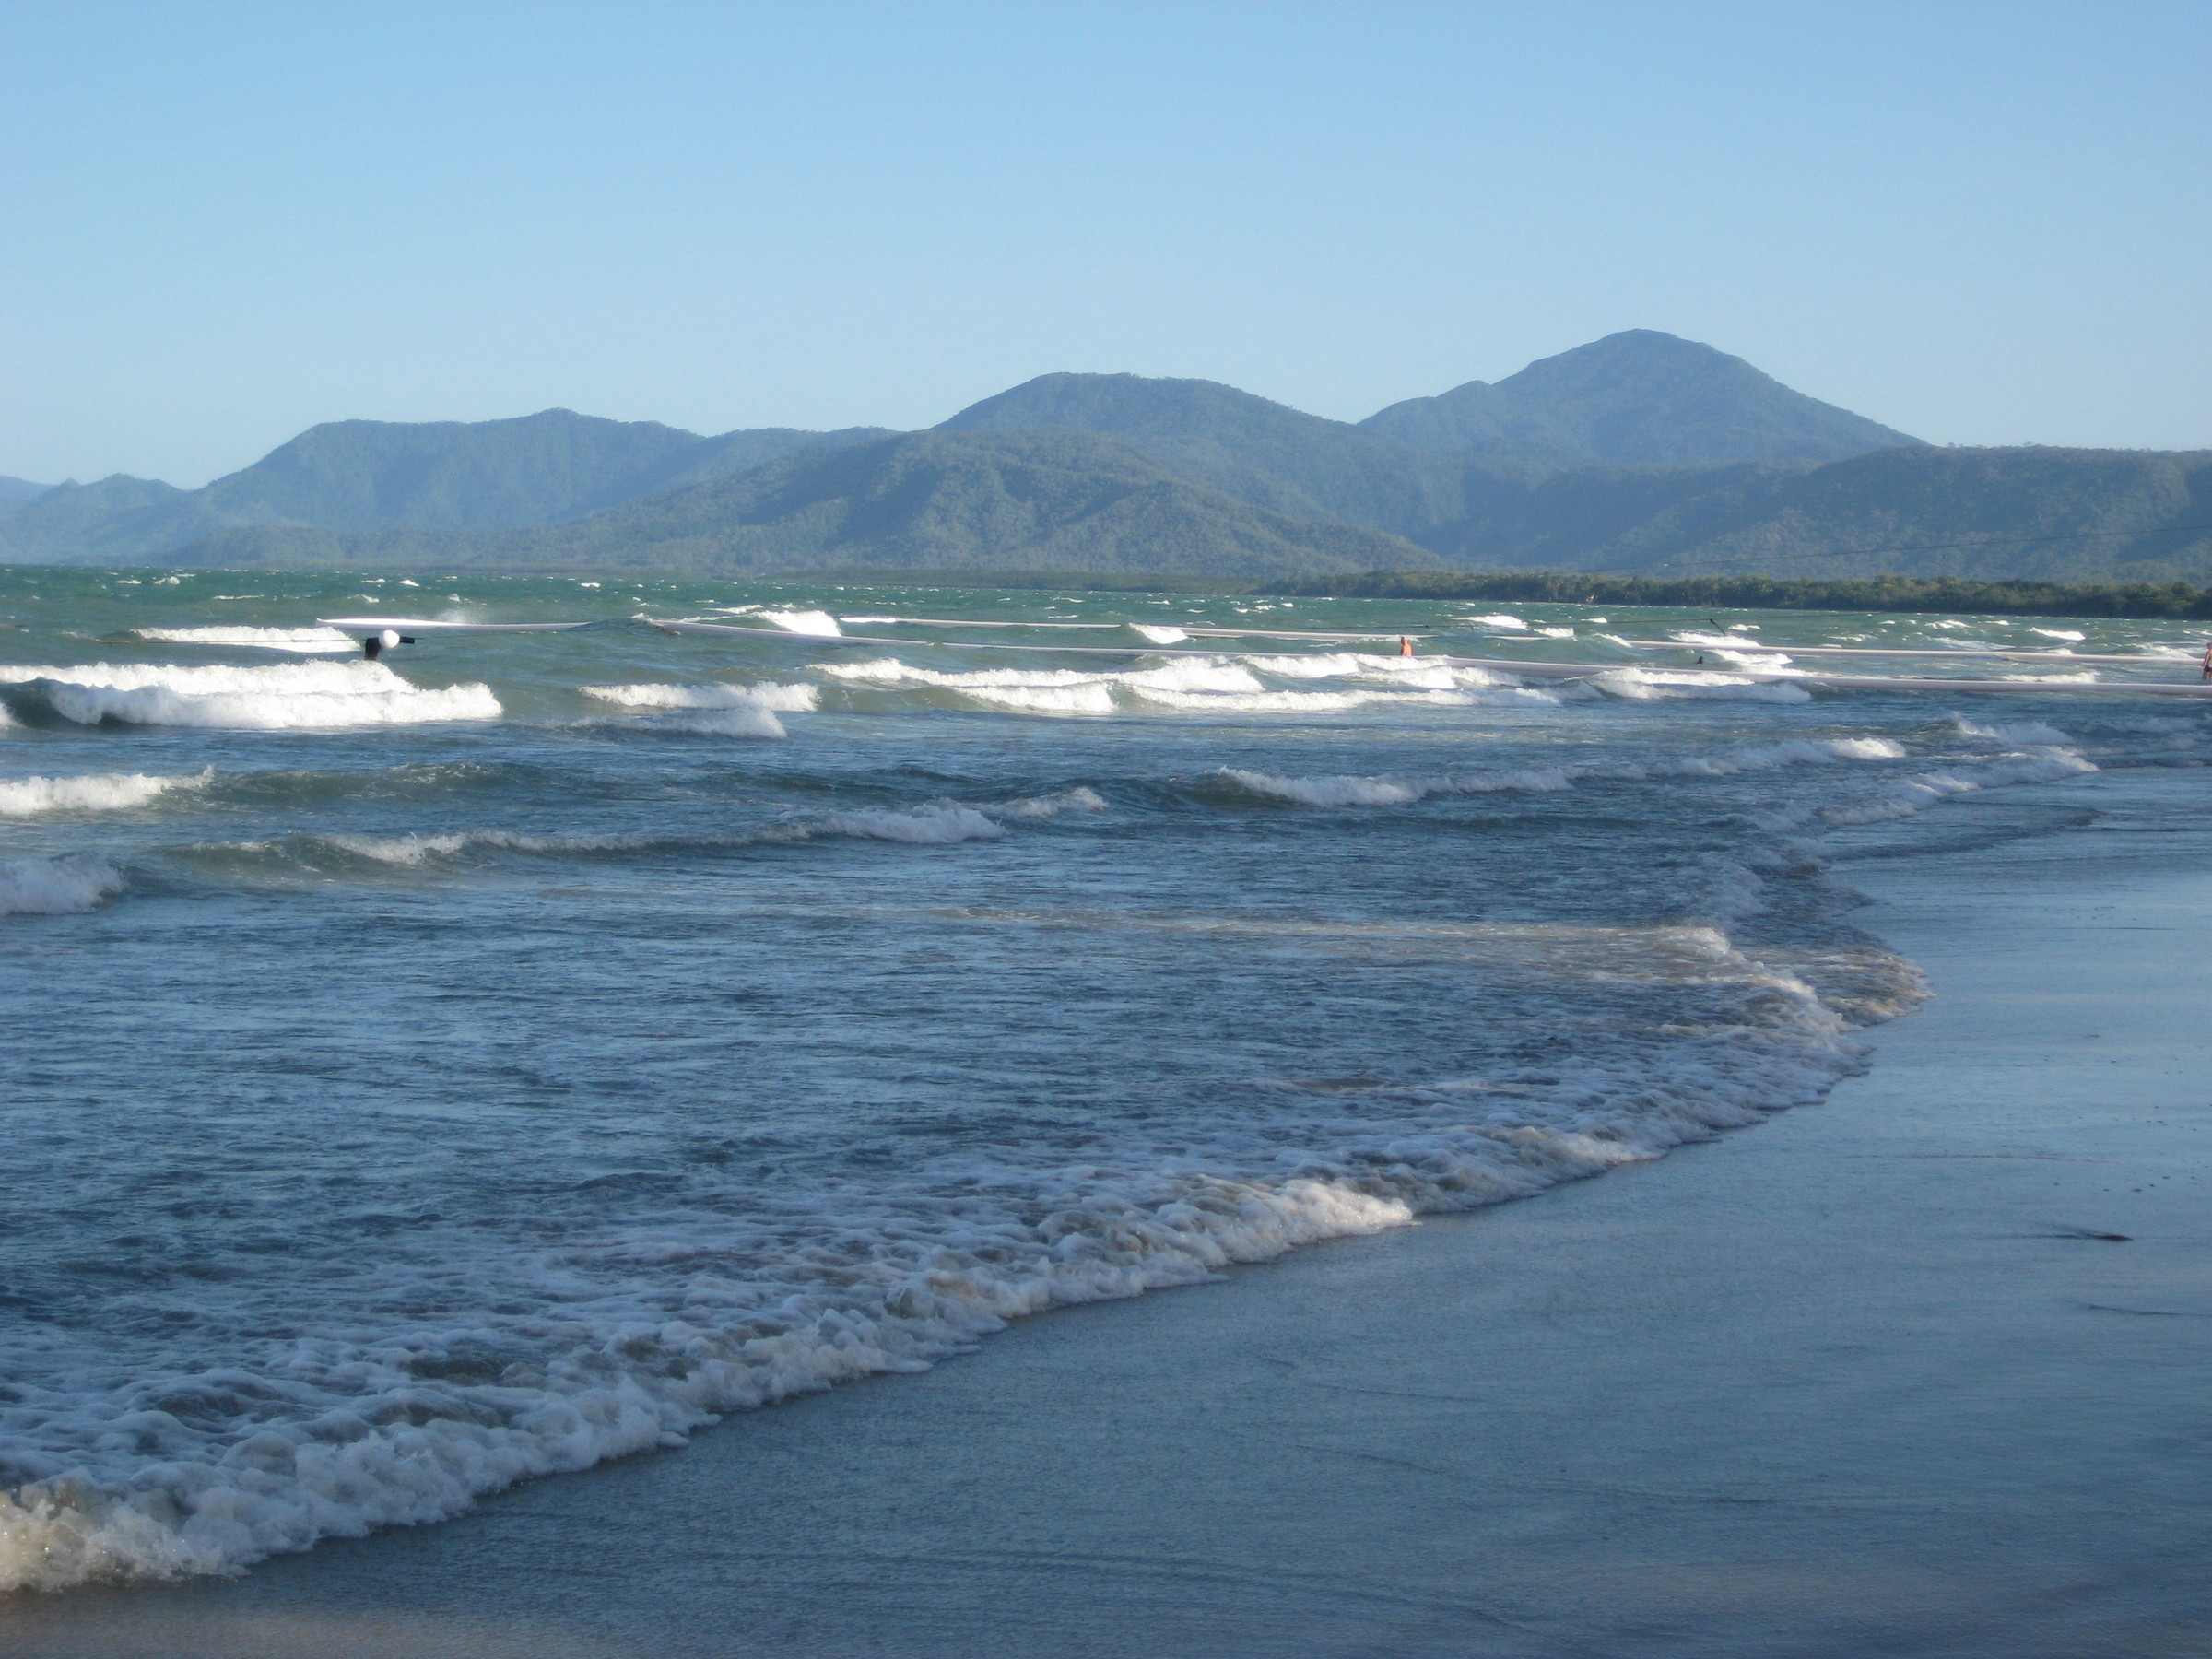 Our apartment in Port Douglas was 5 mins on foot from this beach. Water temperature a bracing 30 degrees!